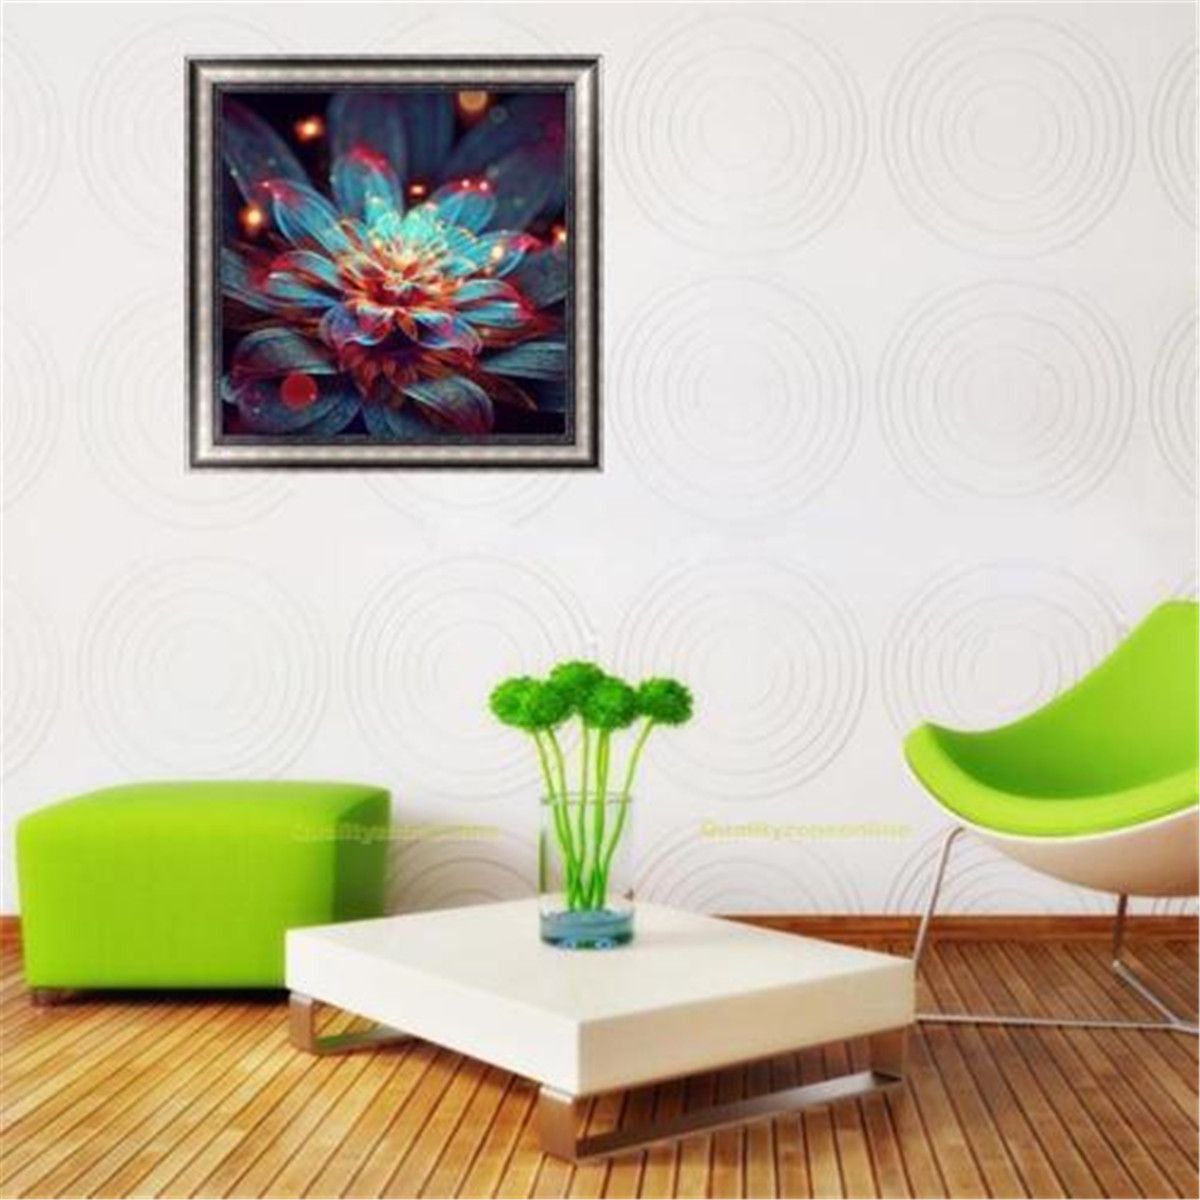 Full-5D-Diamond-Paintings-Tool-Abstract-Flower-Craft-Stitch-Tools-Home-Wall-Decorations-1605765